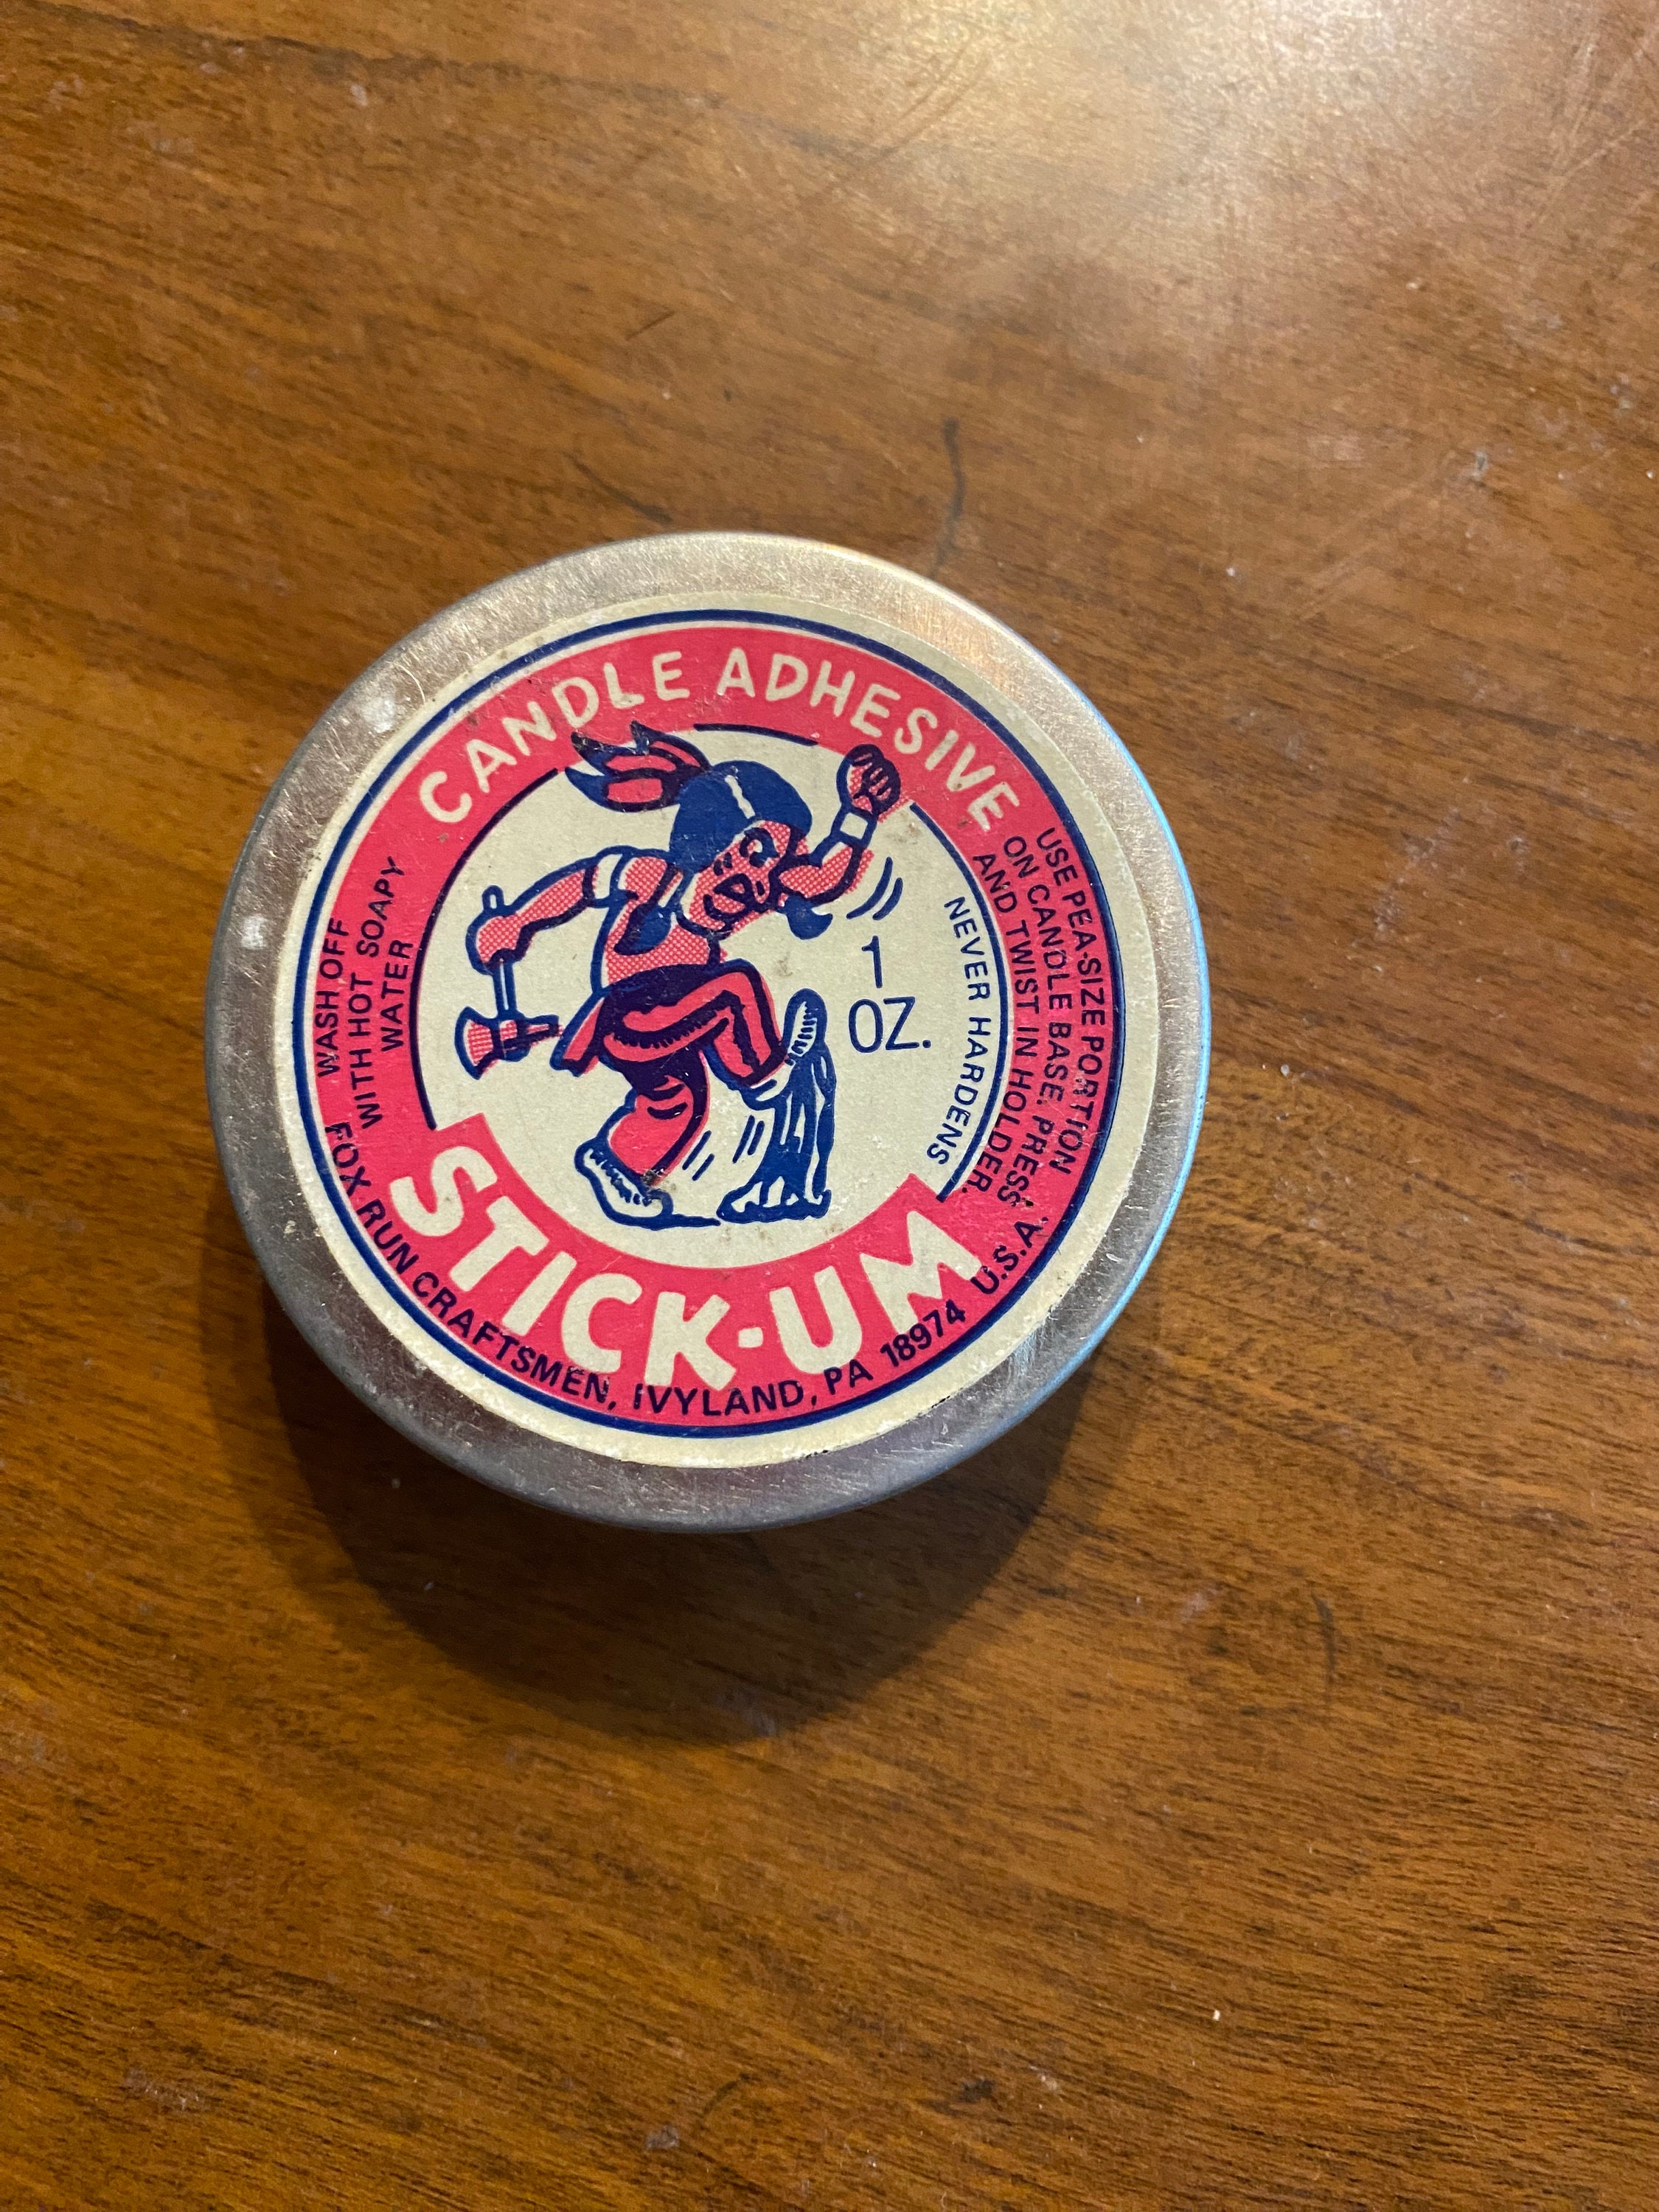 Vintage 2 Tins of Stick Um Candle Adhesive Stickum 1 Oz Each 1 Used 1 New 